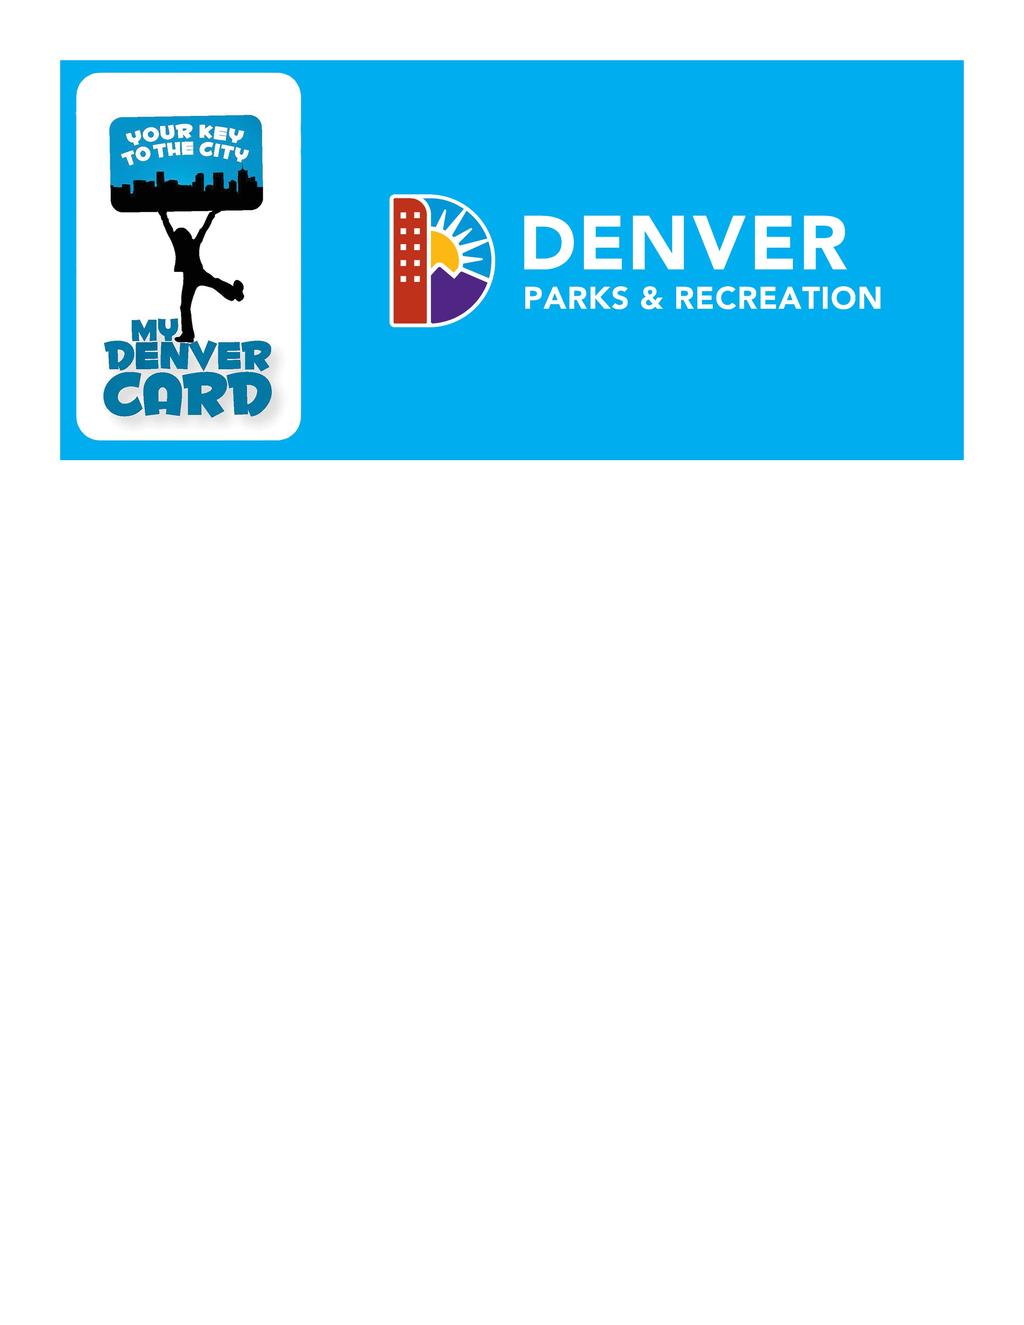 There are currently NO MY Denver activities scheduled at this recreation center. MY Denver Cardholders can access any Denver Recreation.